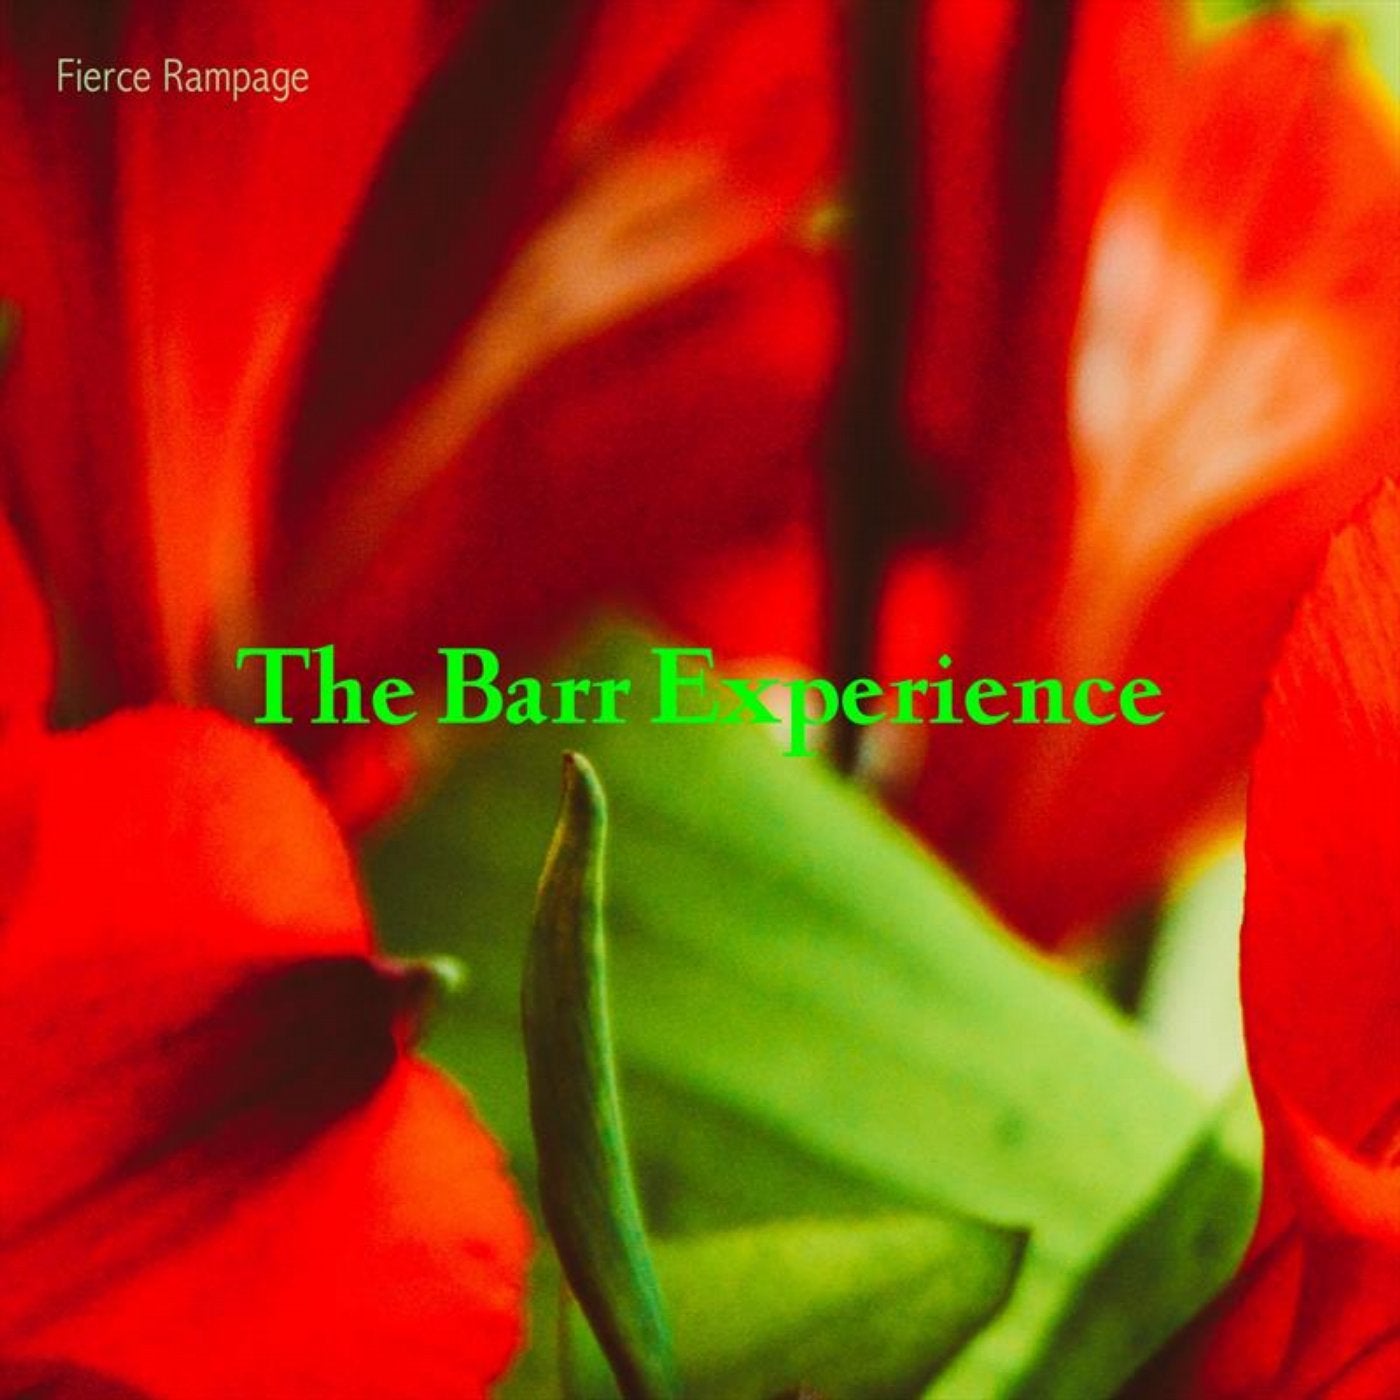 The Barr Experience